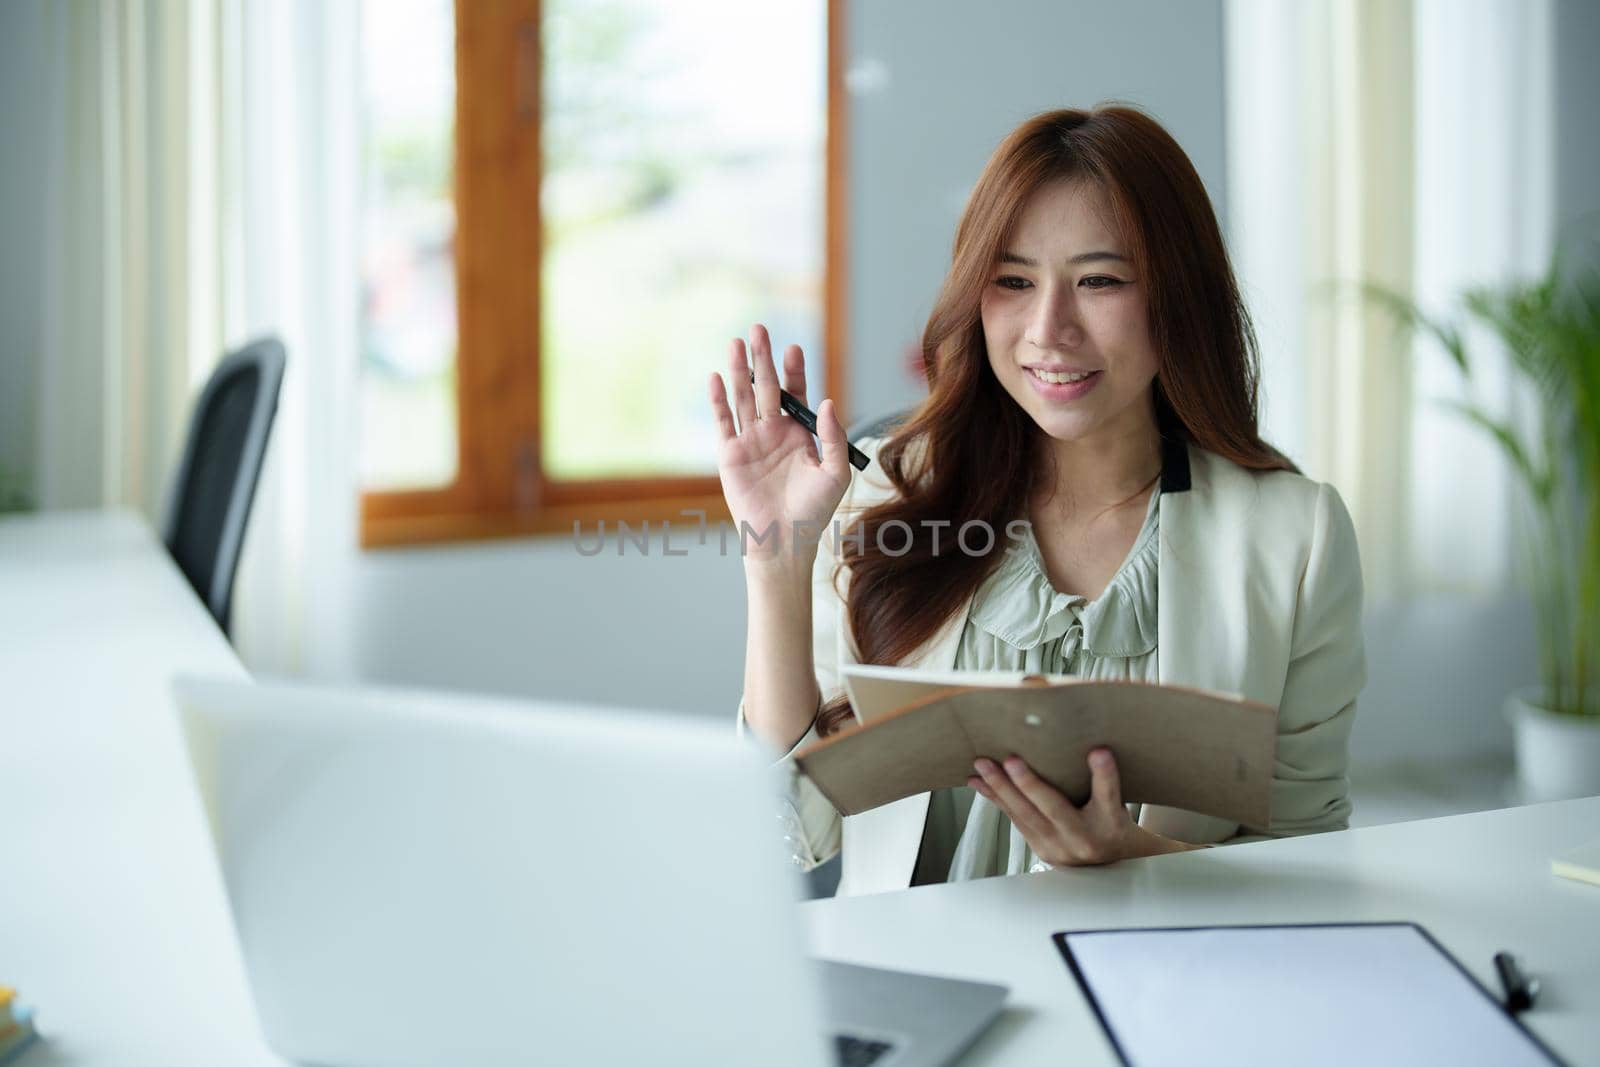 Portrait of an Asian bank employee using a laptop video conferencing with team members working on budget paperwork at their desk in their office.